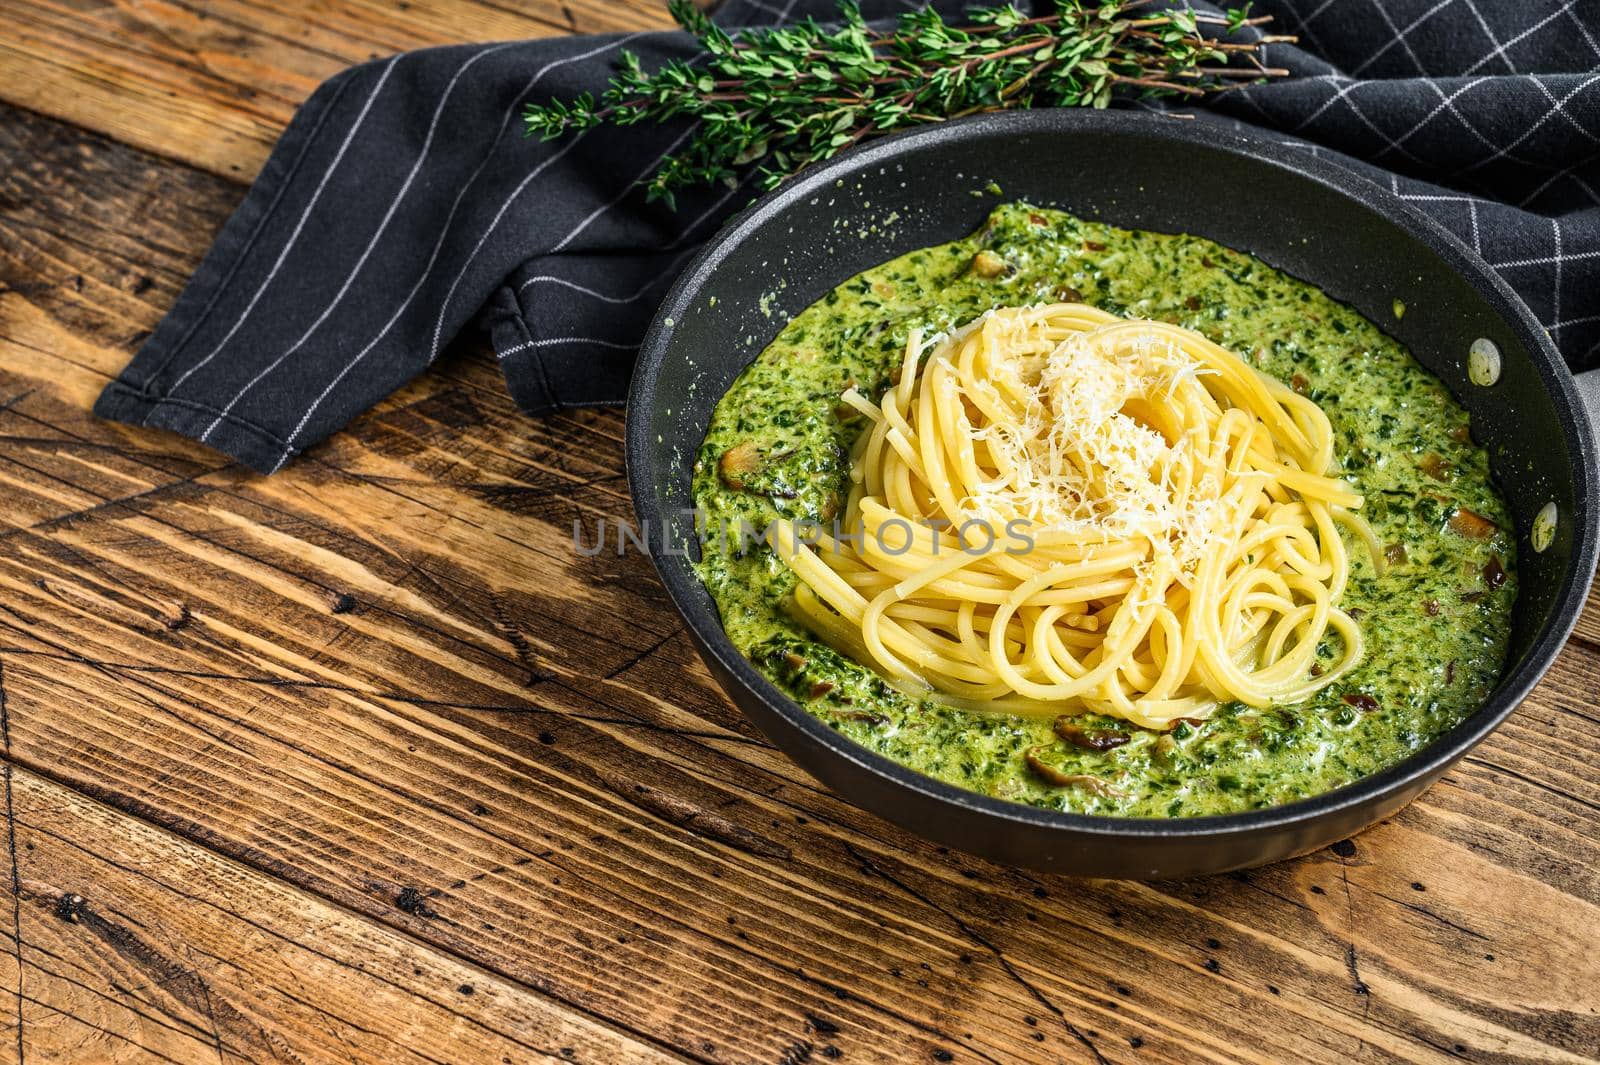 Pasta spaghetti with pesto sauce and fresh spinach and parmesan in a pan. Wooden background. Top view. Copy space by Composter